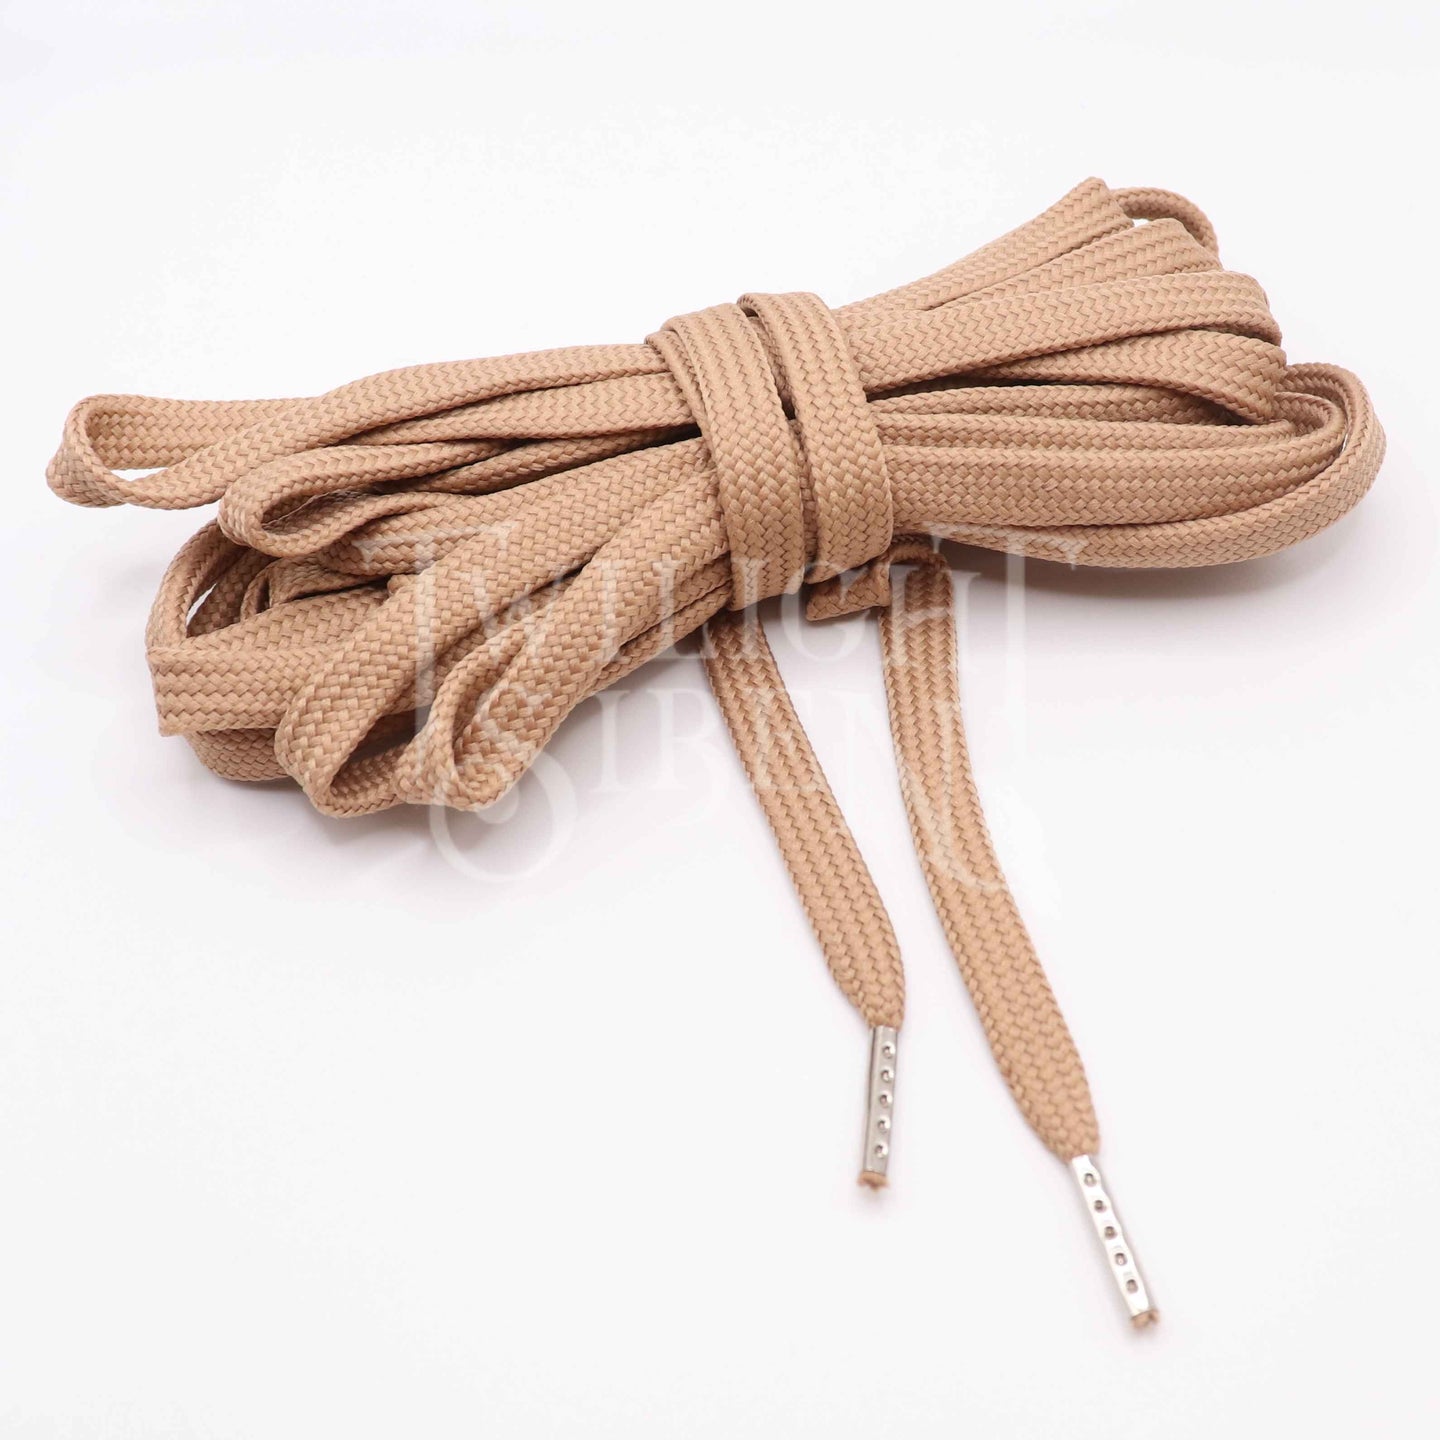 Dark beige polyester lacing for corsets  stays or shoes with the ends finished with metal aglets